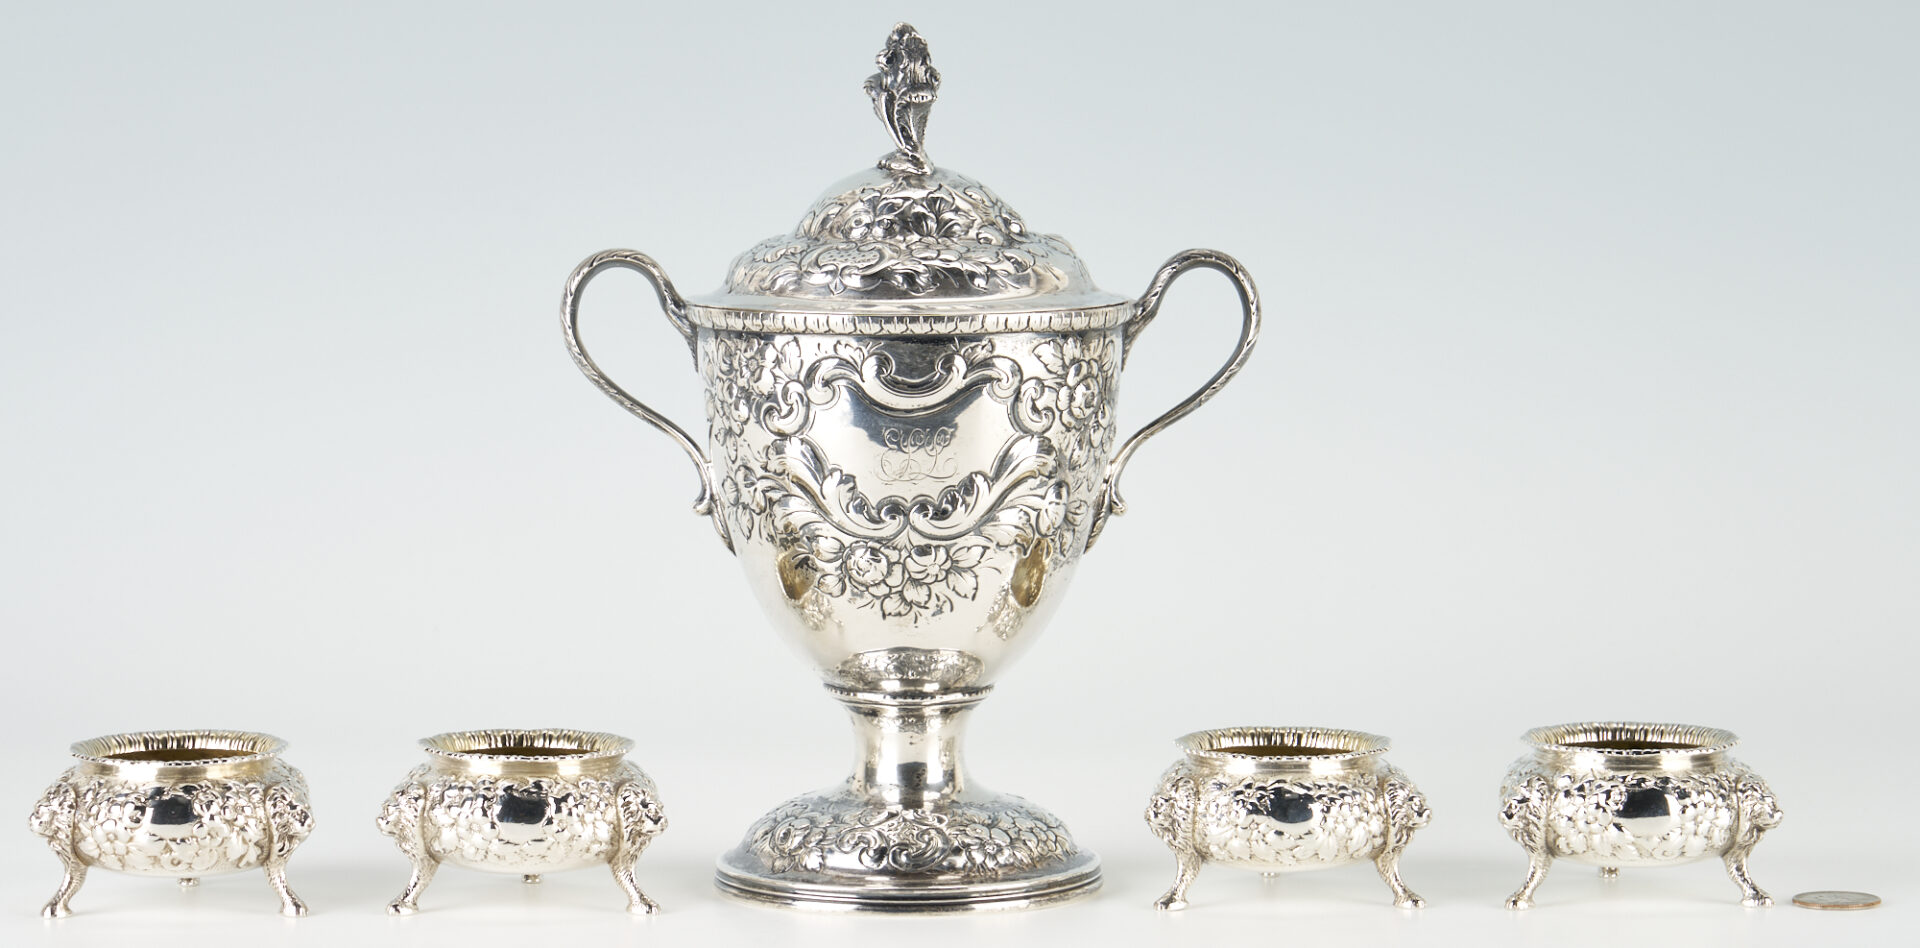 Lot 77: Baltimore Repousse Coin Silver Sugar Bowl and Salts inc. A.E. Warner